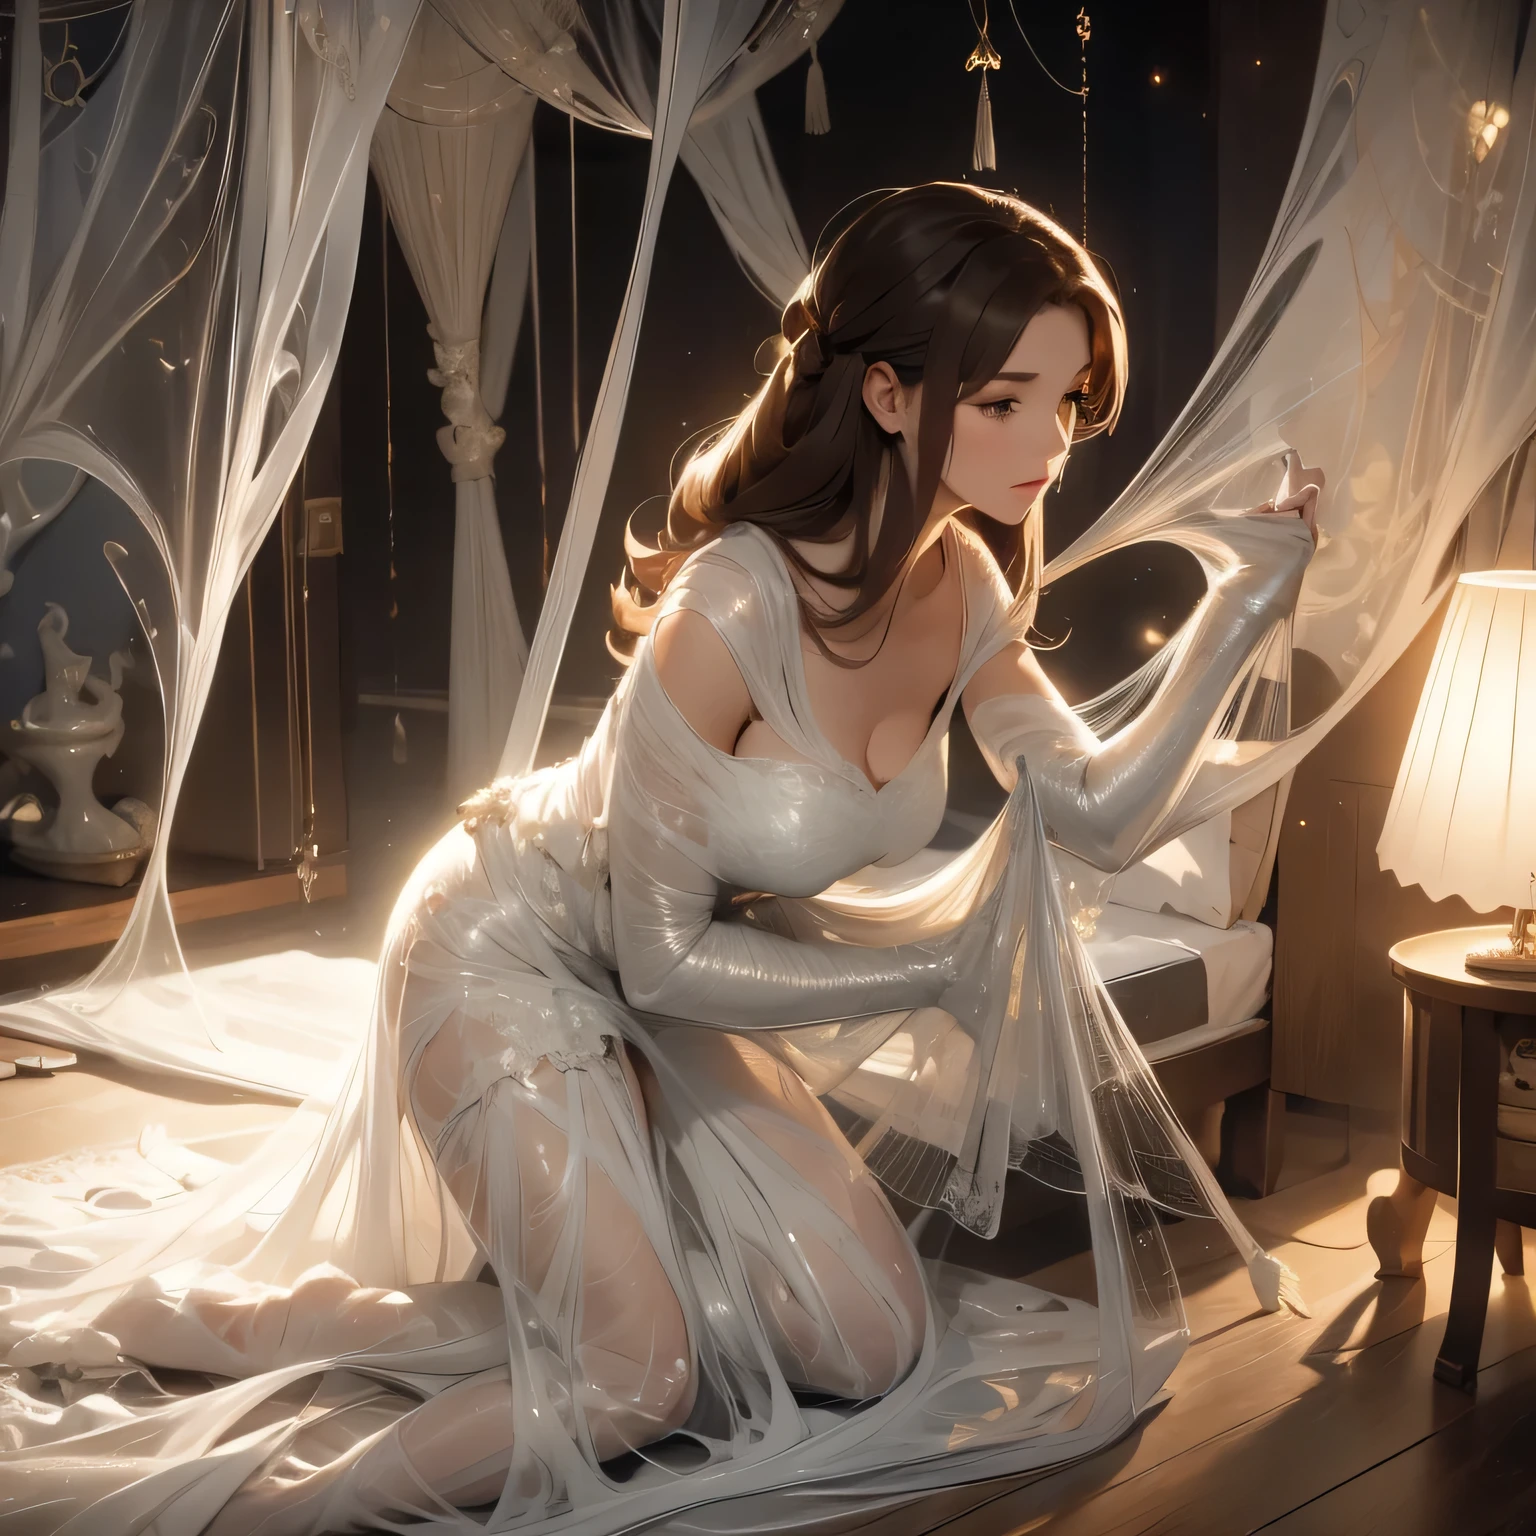 1girl,Spider weaving a net on the girl,réalism:1.2,ultra-detailed,bedroom setting,stretched pose,struggling in the net,brown haired,very long sheer skirt,oaken floor,soft sunlight,delicate spider silk,lace curtains,bedside table,decorative pillows